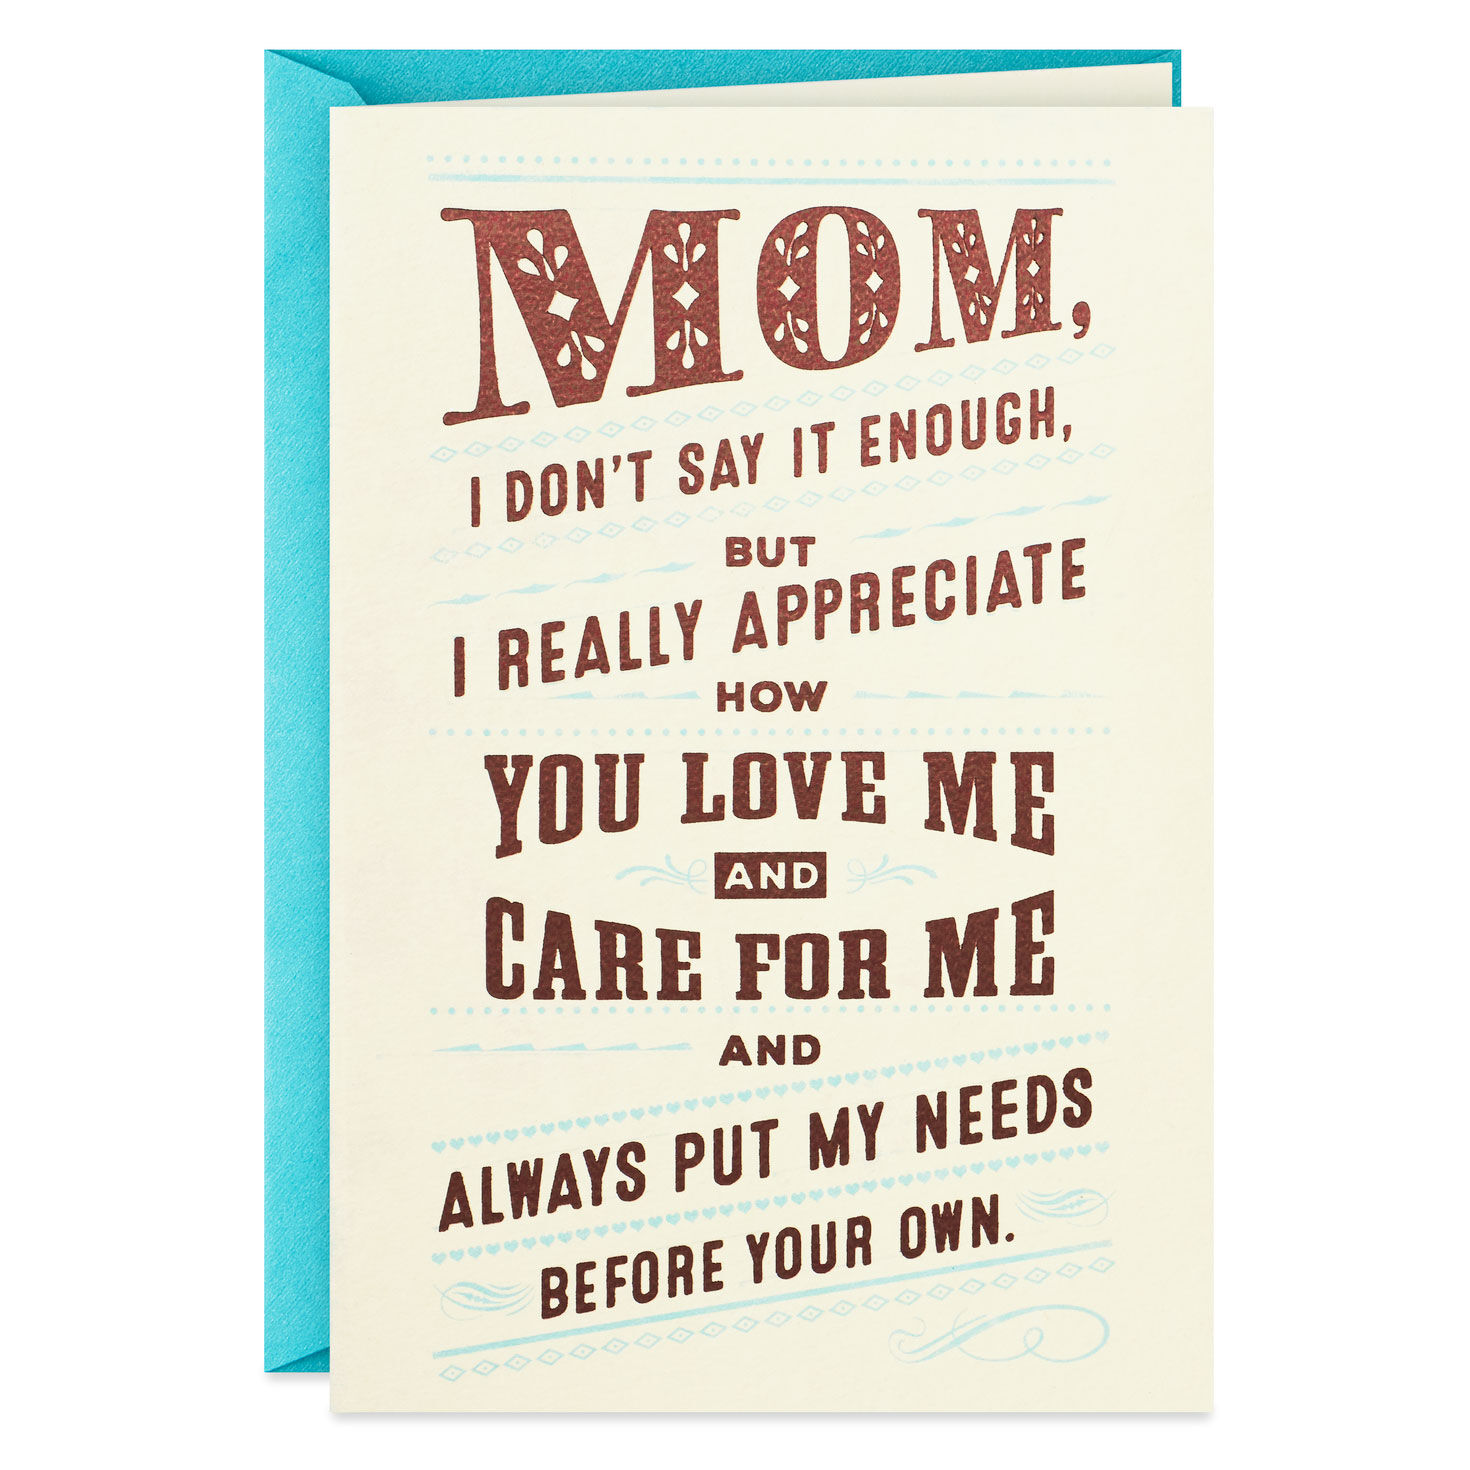 funny birthday cards for your mom